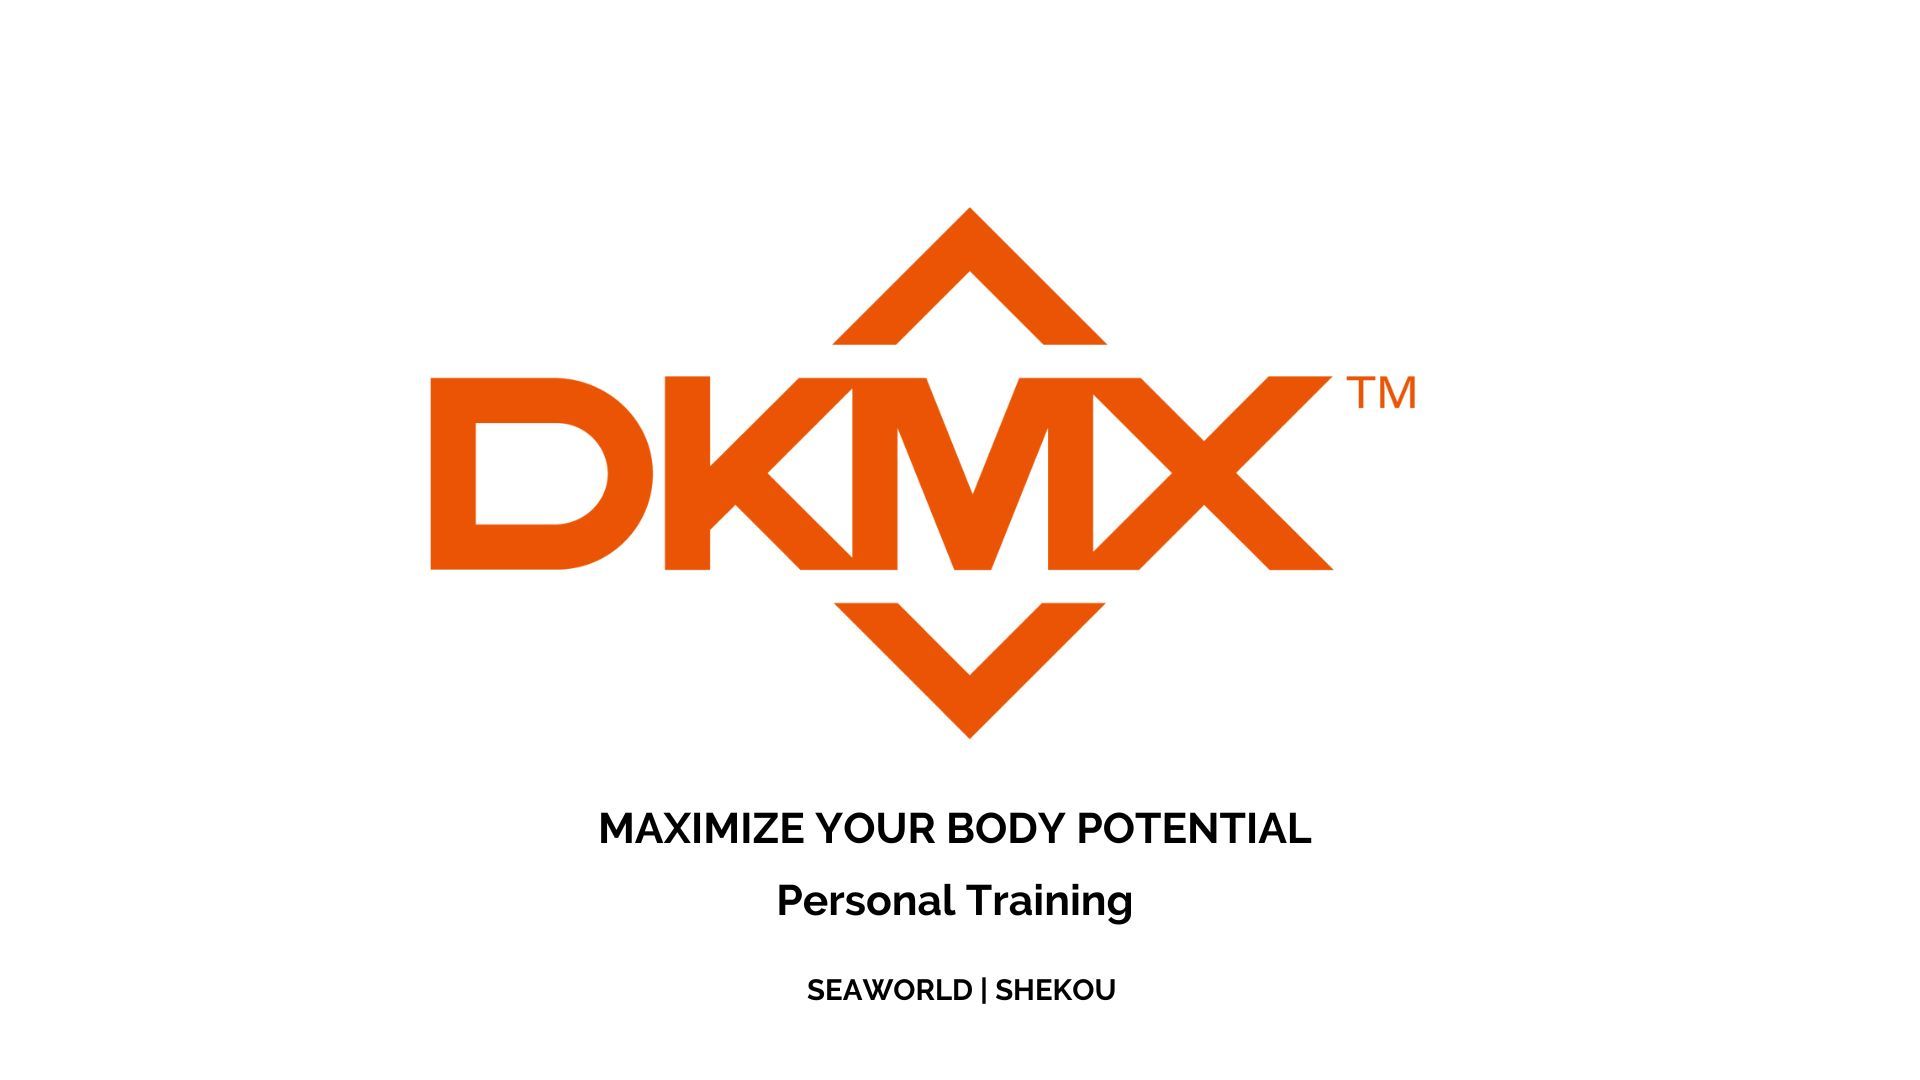 Featured image for “DKMX: Personal Training”